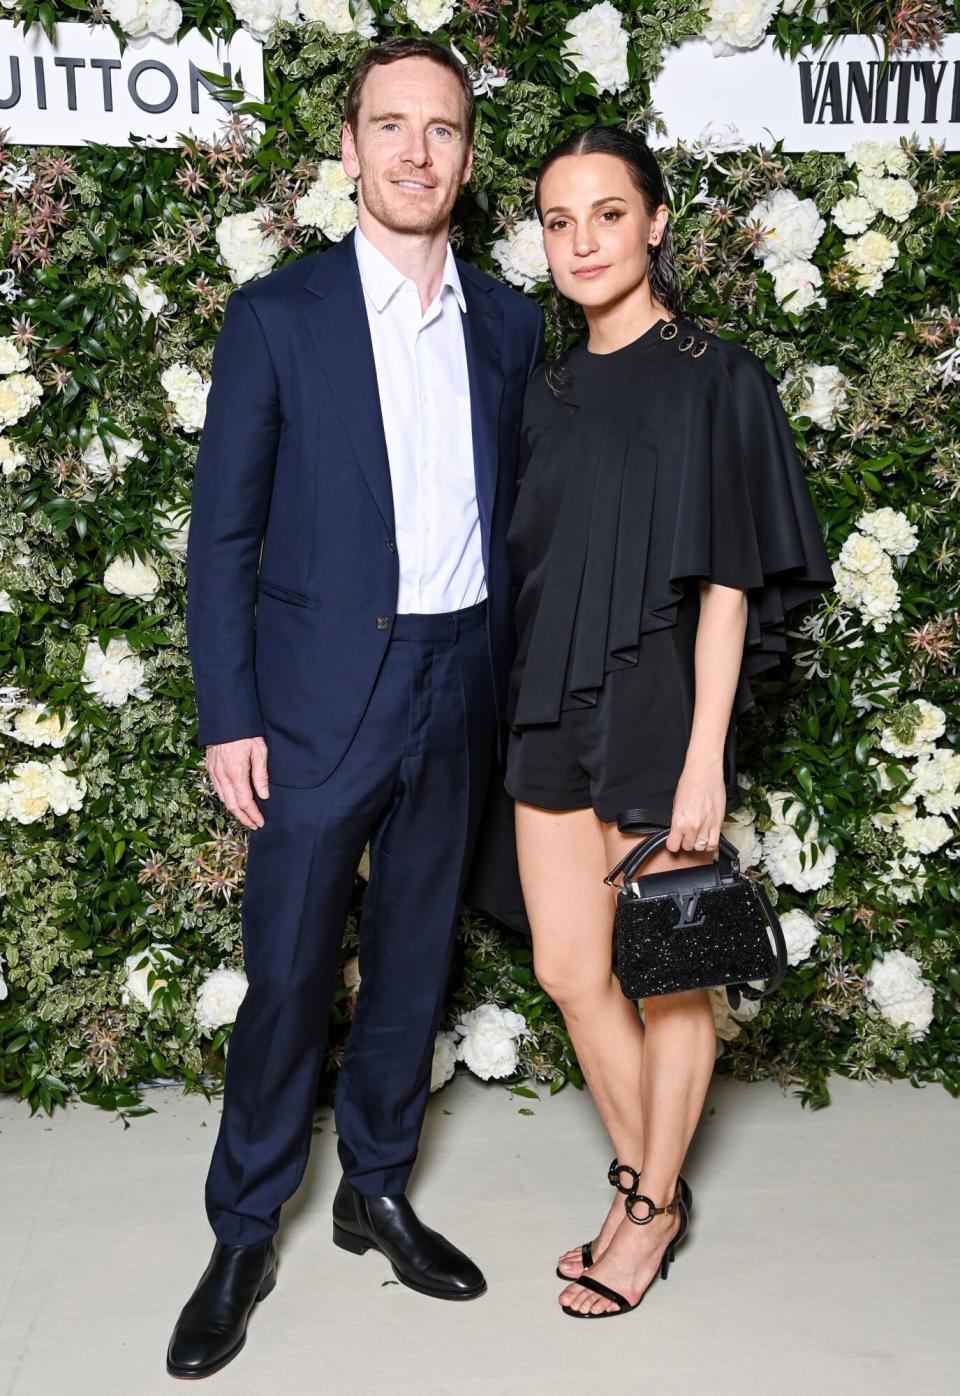 CANNES, FRANCE - MAY 20: Michael Fassbender and Alicia Vikander attend the Vanity Fair x Louis Vuitton dinner during the 75th annual Cannes Film Festival at Fred LEcailler on May 20, 2022 in Cannes, France. (Photo by Pascal Le Segretain/Getty Images for Louis Vuitton)